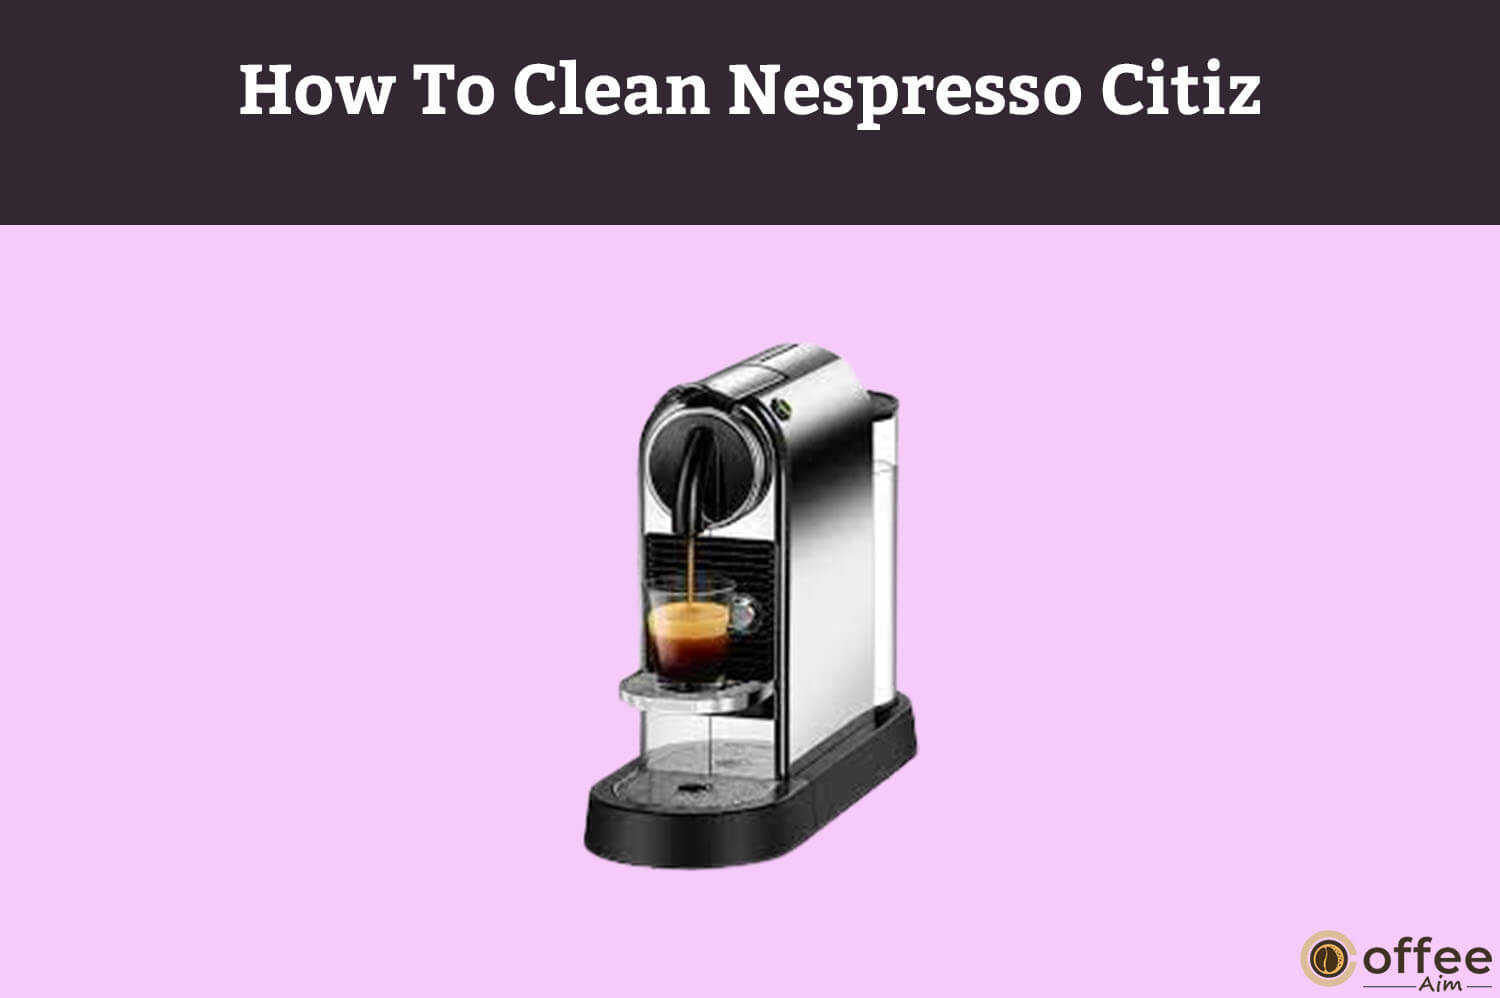 Featured image for the article "How To Clean Nespresso Citiz"